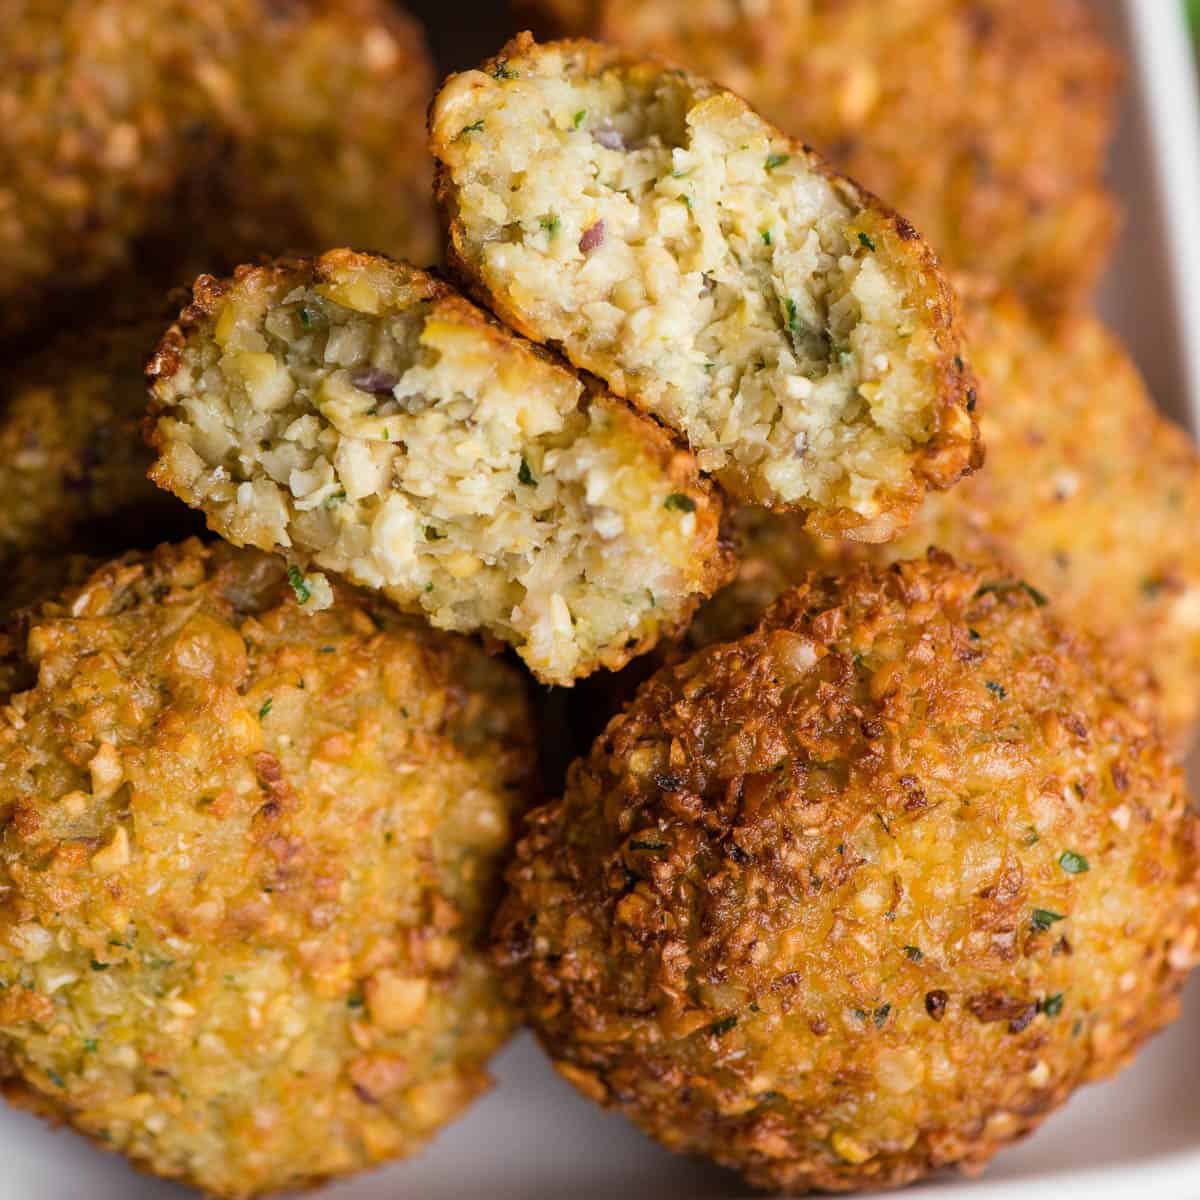 How to Make} Homemade Falafel Recipe - Self Proclaimed Foodie